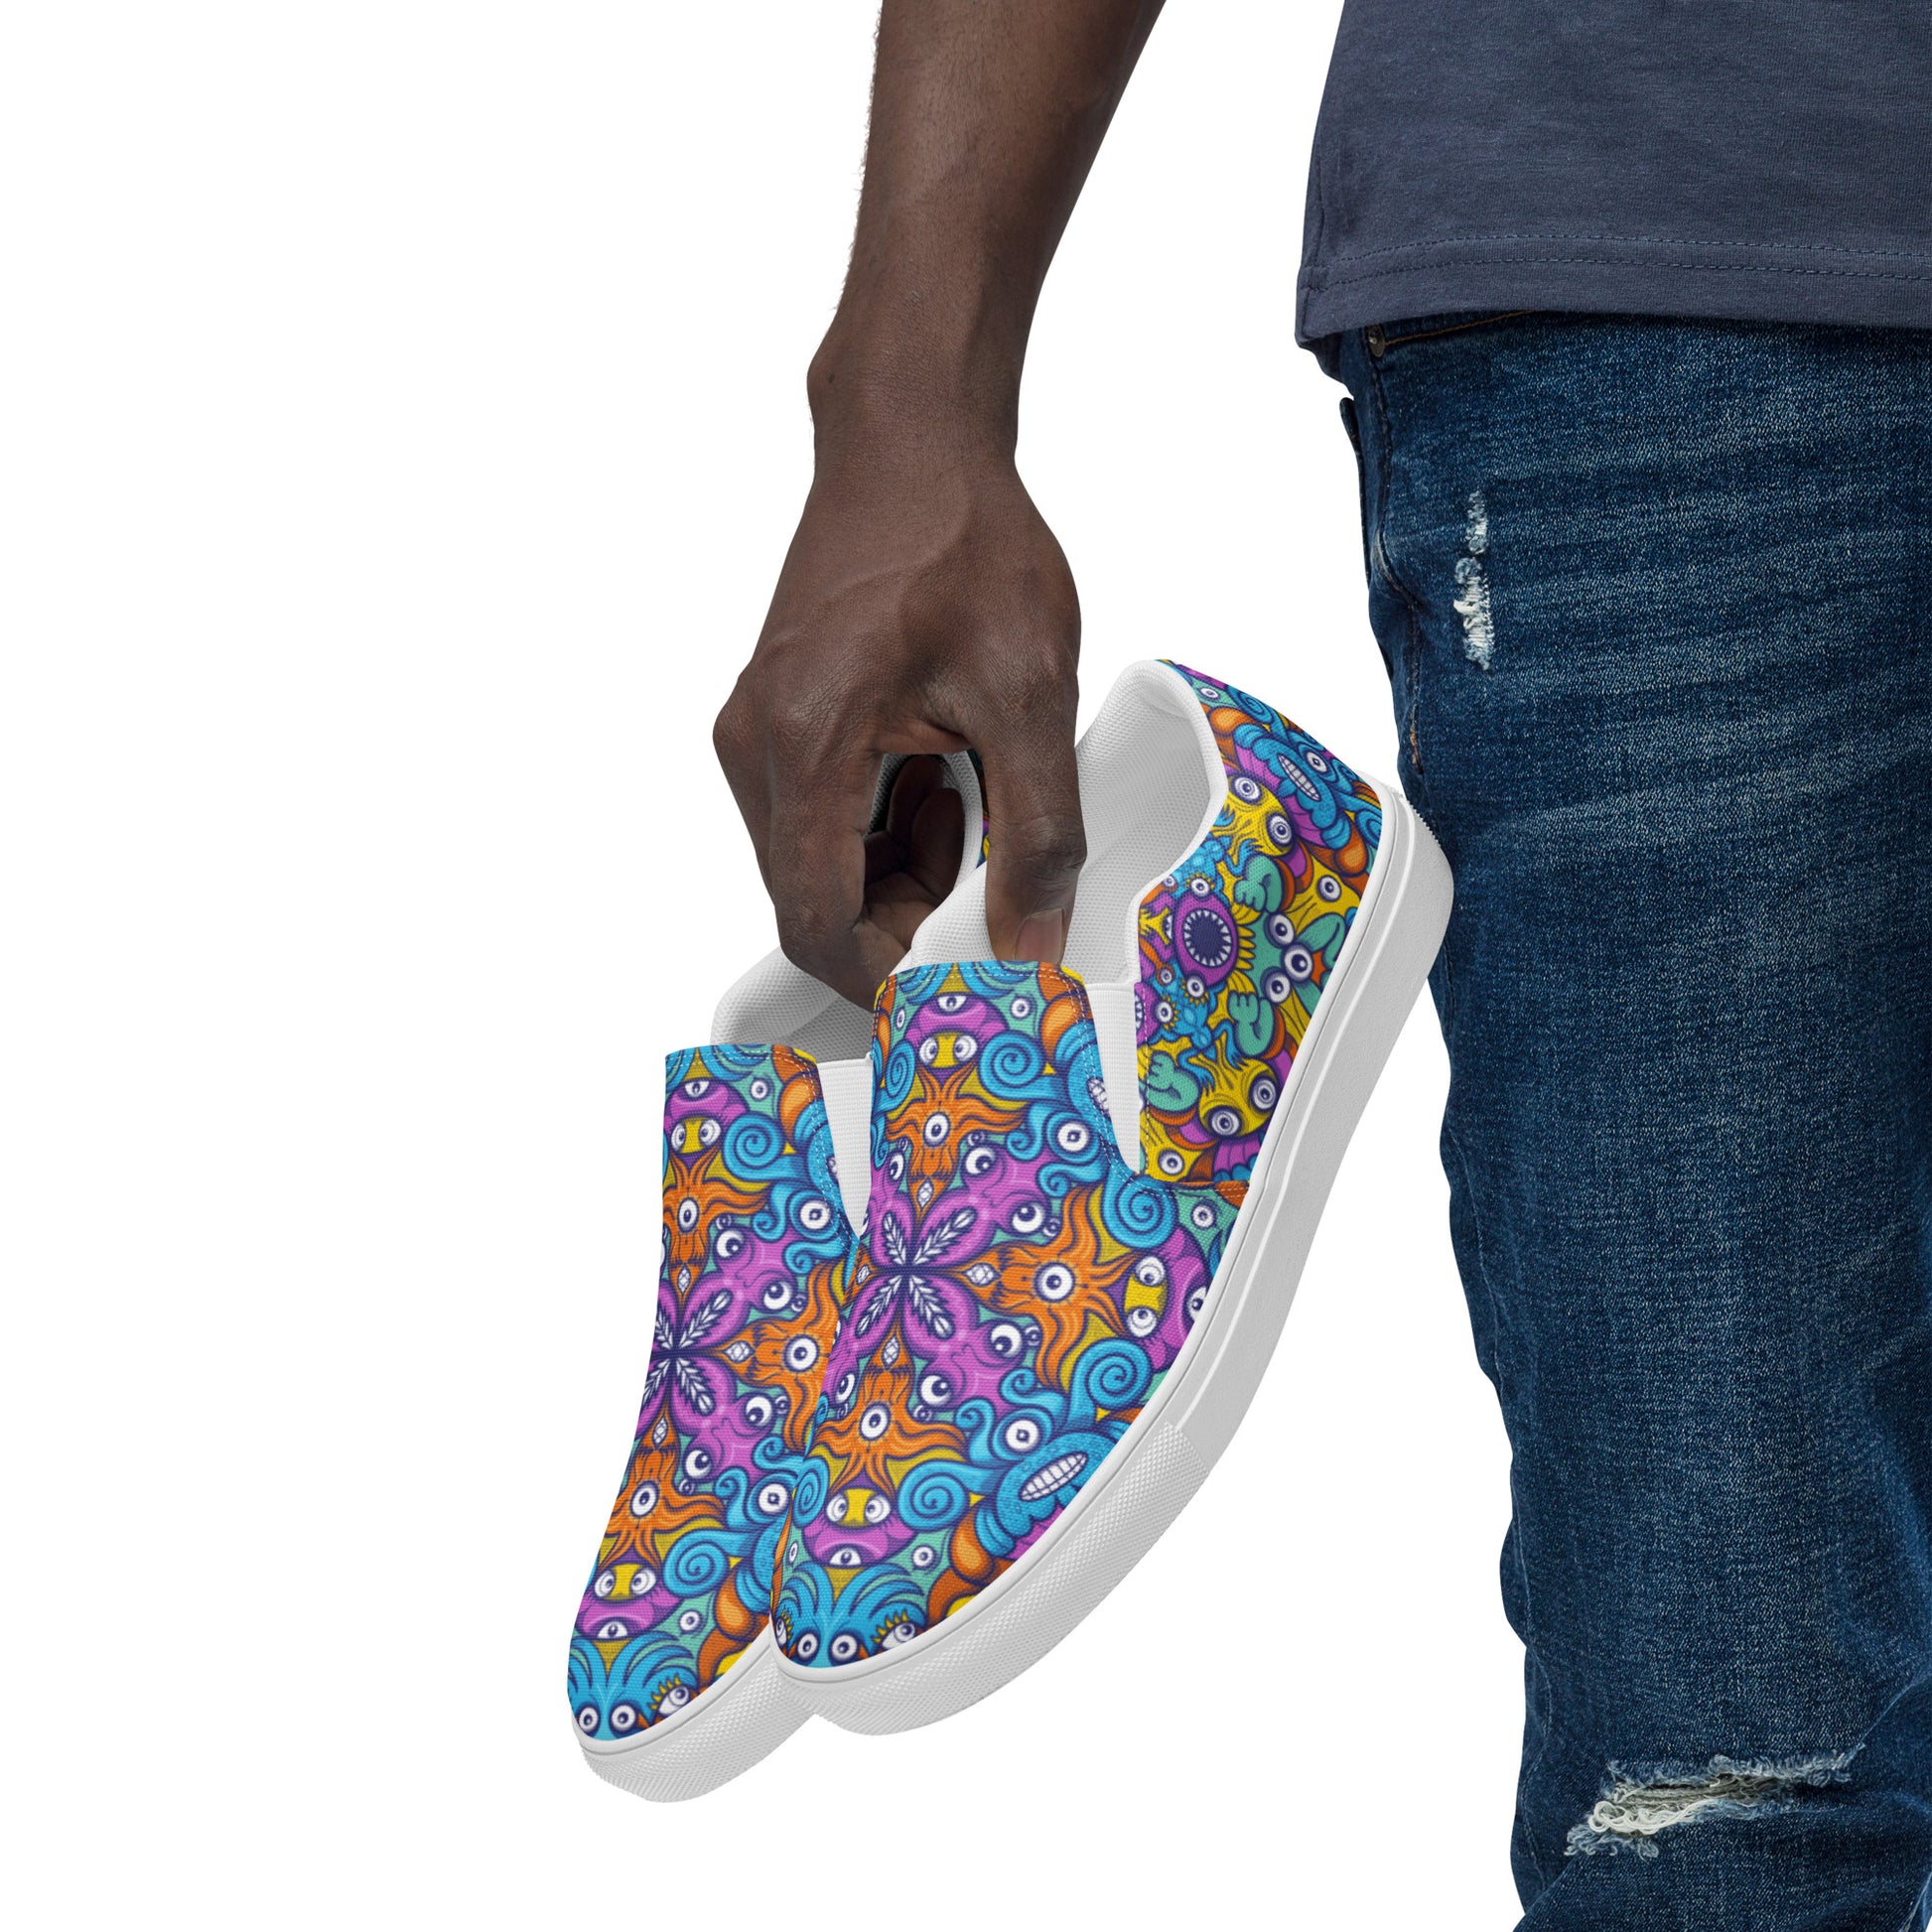 The ultimate sea beasts cast from the deep end of the ocean Men’s slip-on canvas shoes. Lifestyle